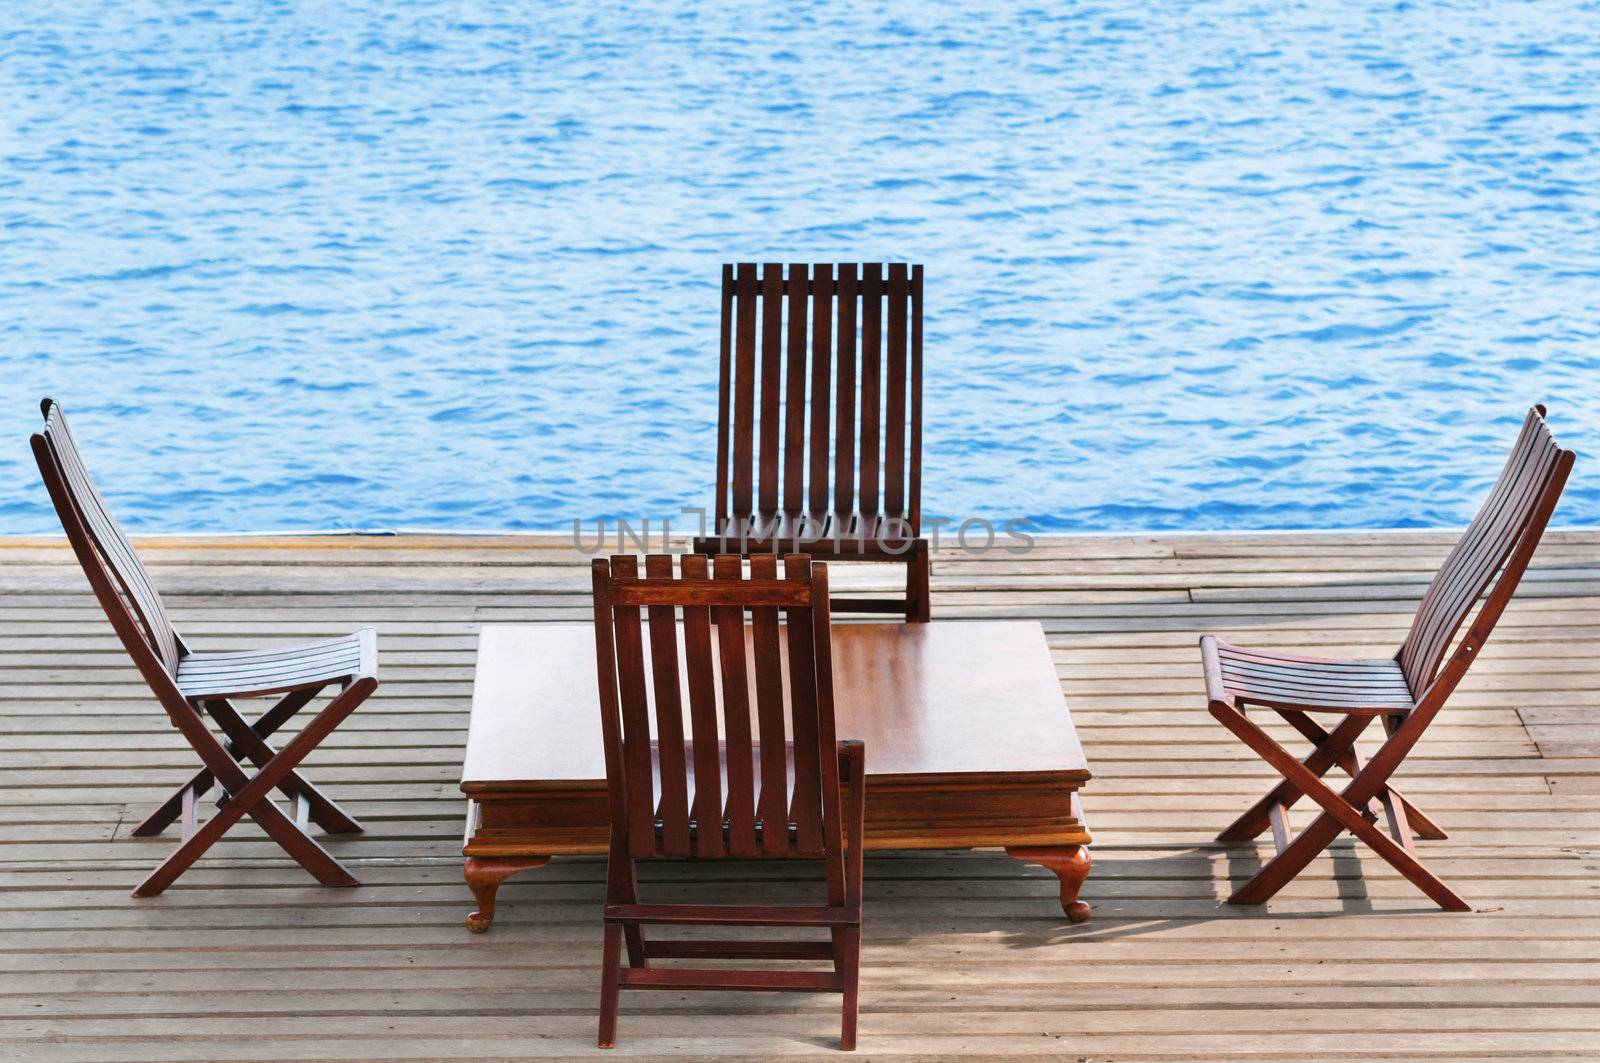 Wooden area with chairs and table on calm blue water